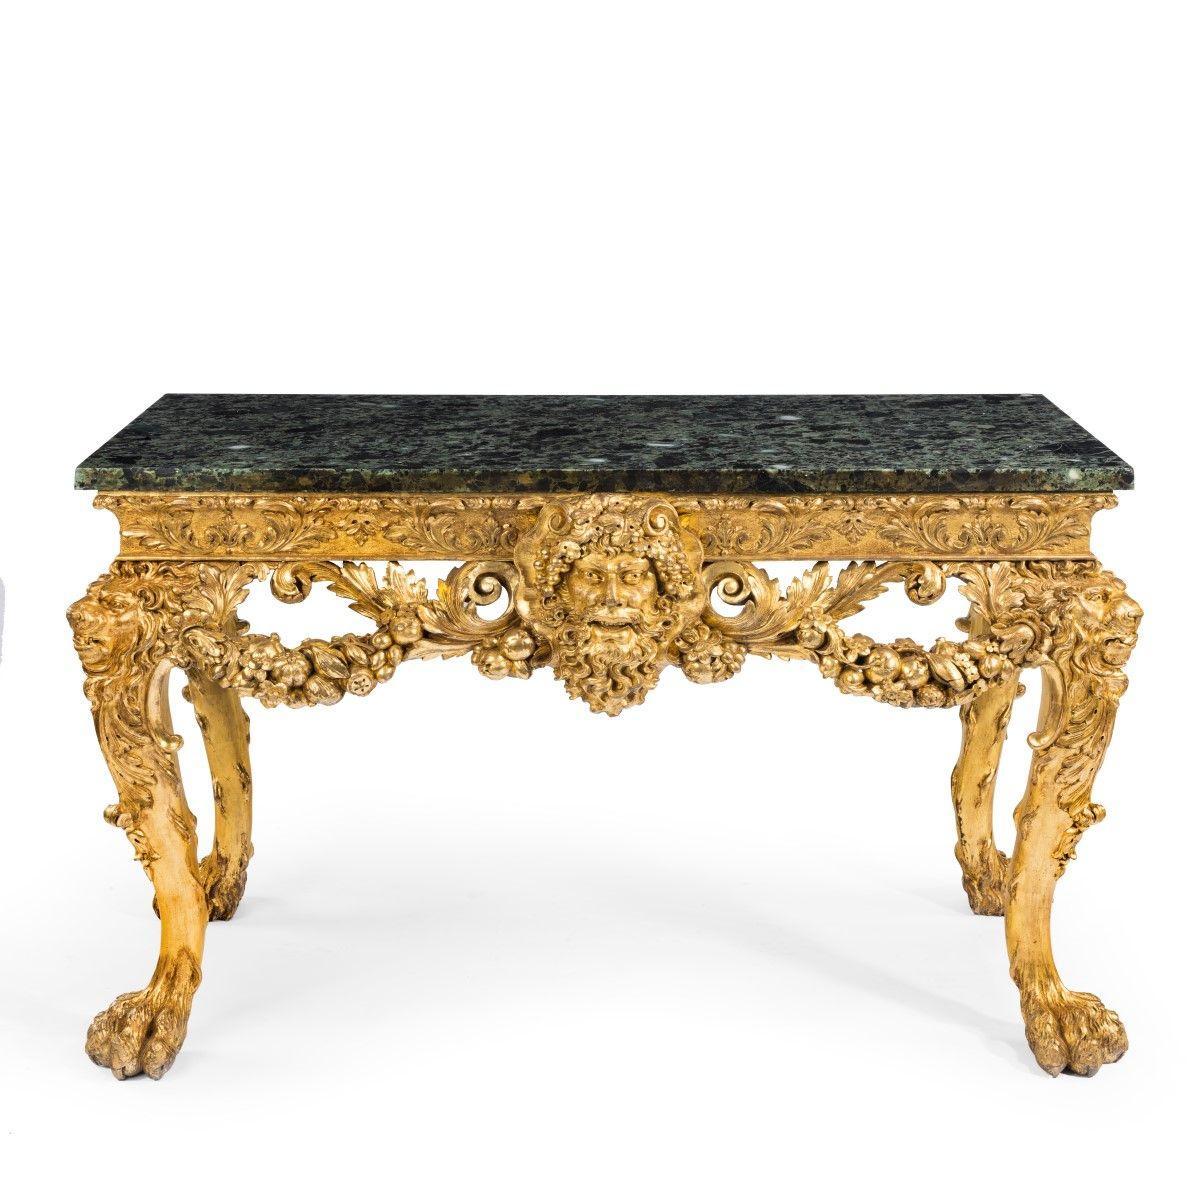 An imposing Victorian giltwood console table in the manner of William Kent, the rectangular serpentine marble top set upon a giltwood base superbly carved with scrolls and garlands heavy with fruit centred on a mask of Bacchus wreathed in vines, the